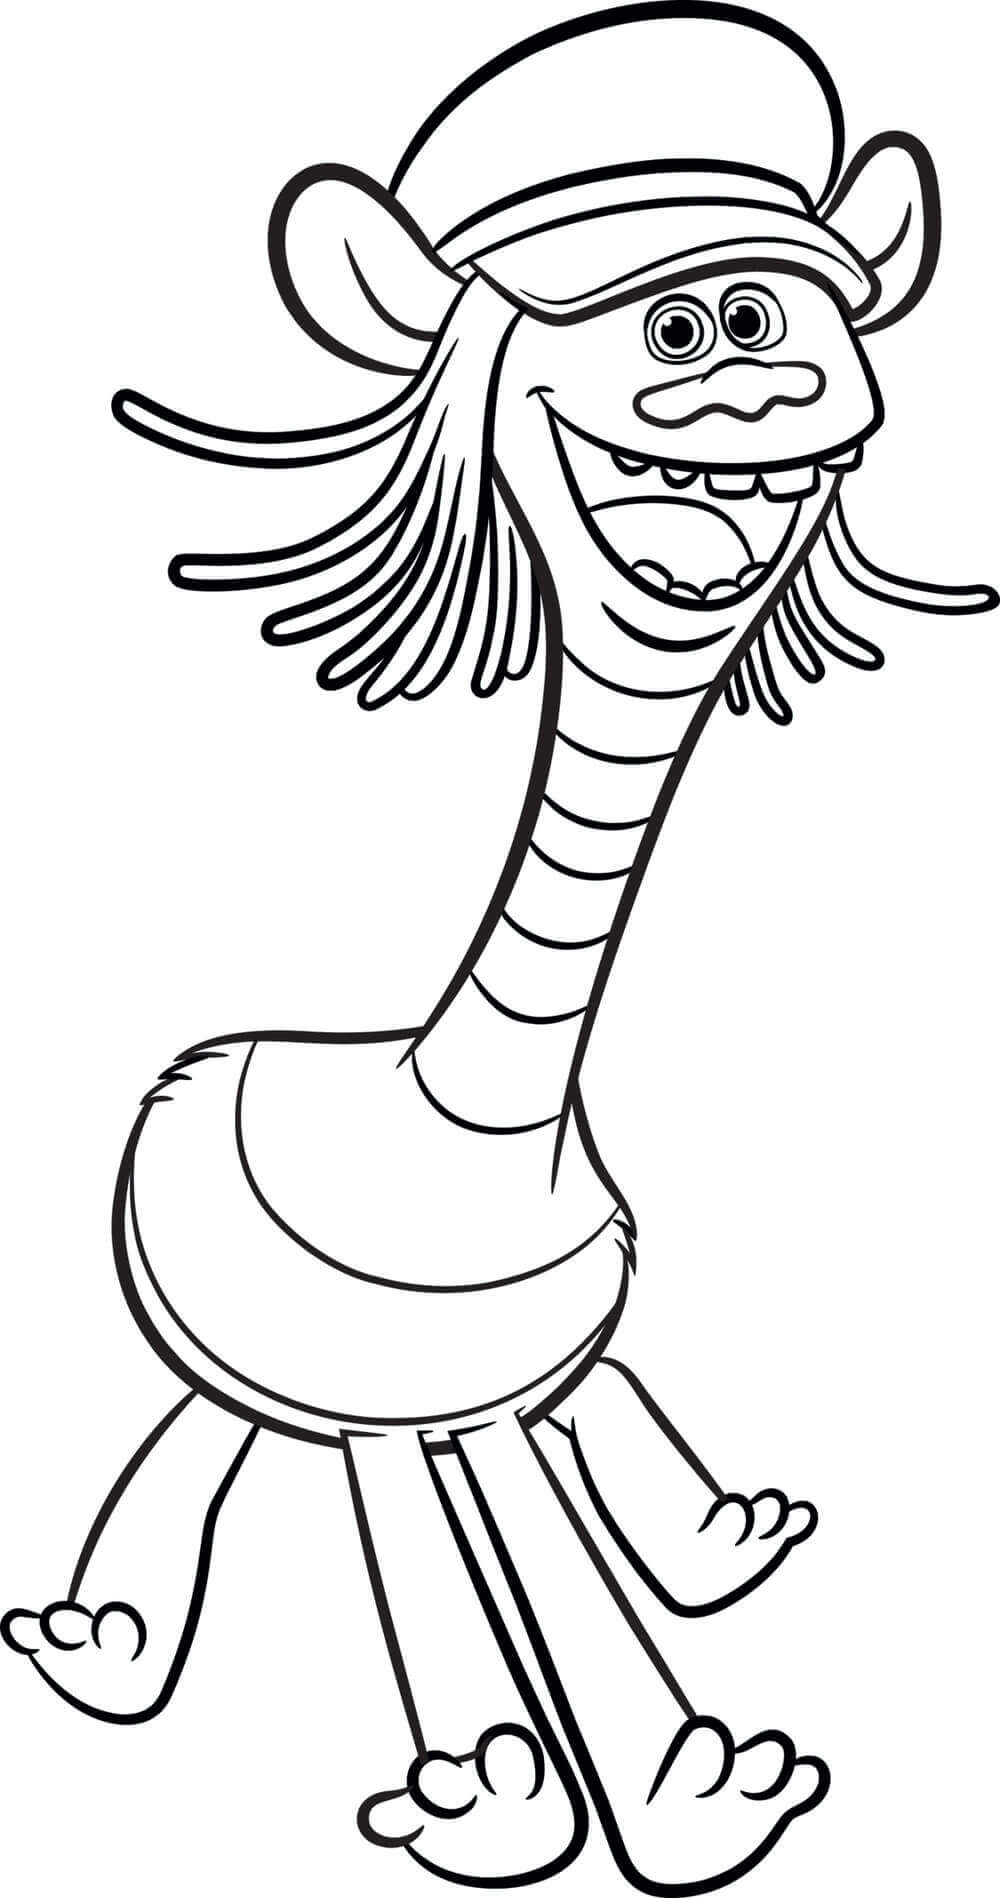 Cooper Coloring Page